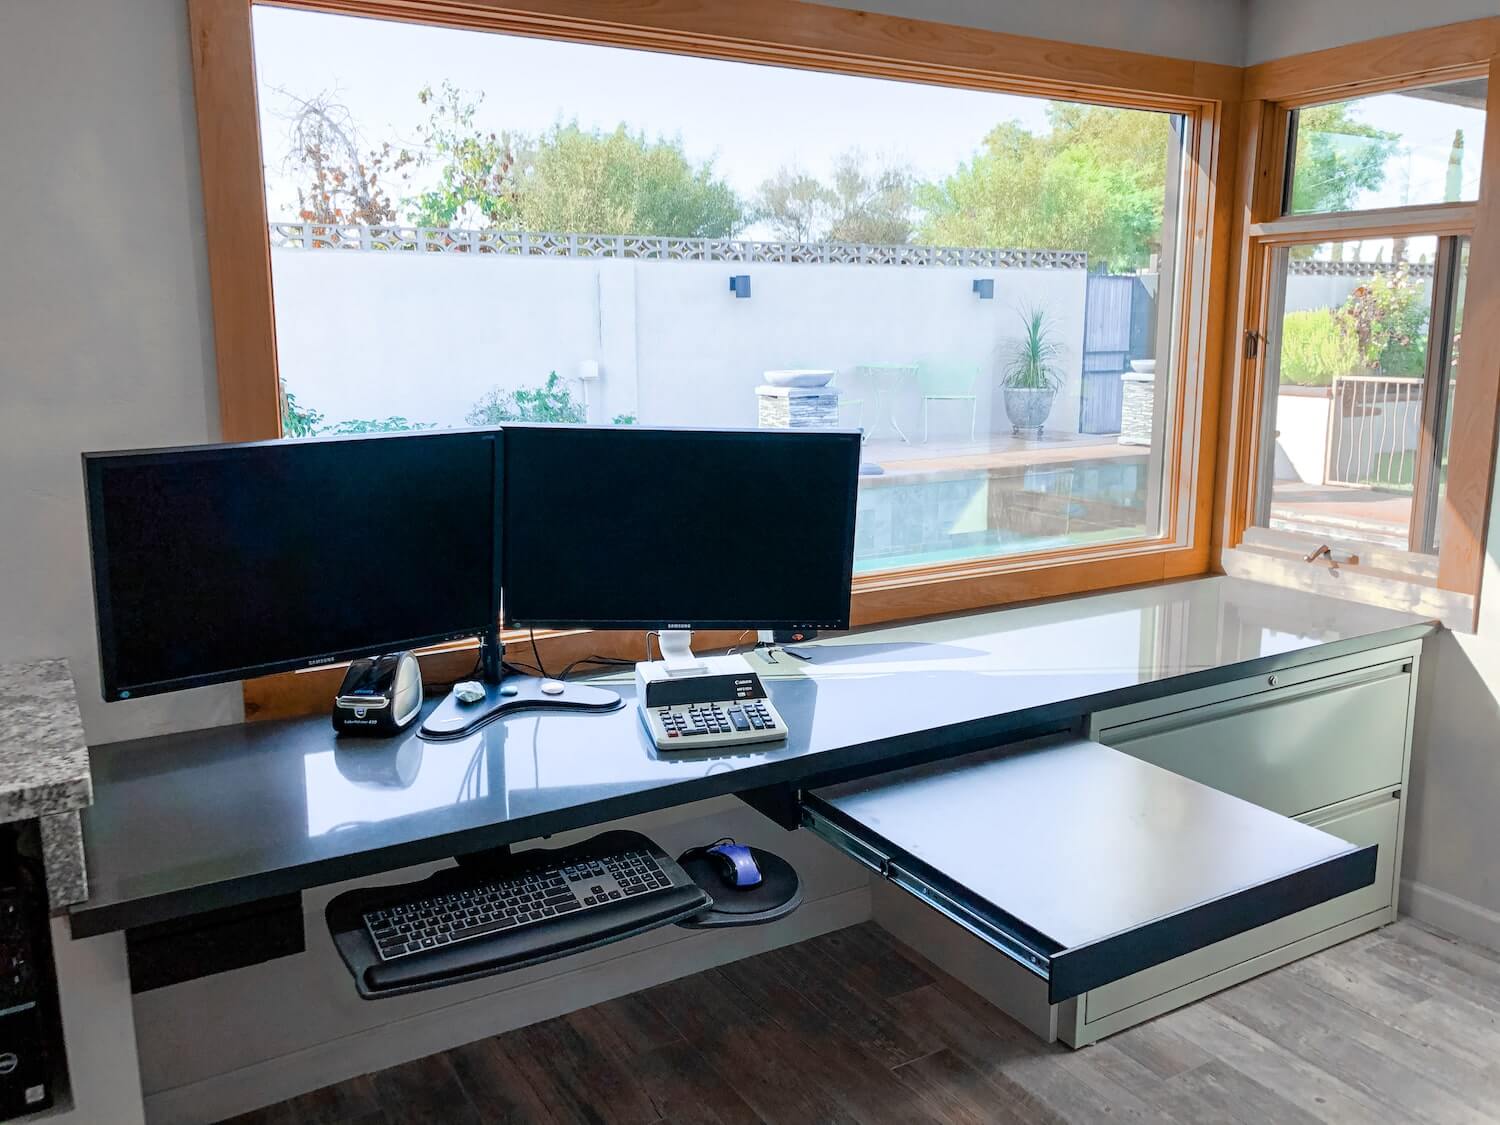 A remodeled home office in Tucson with a large window letting in natural light